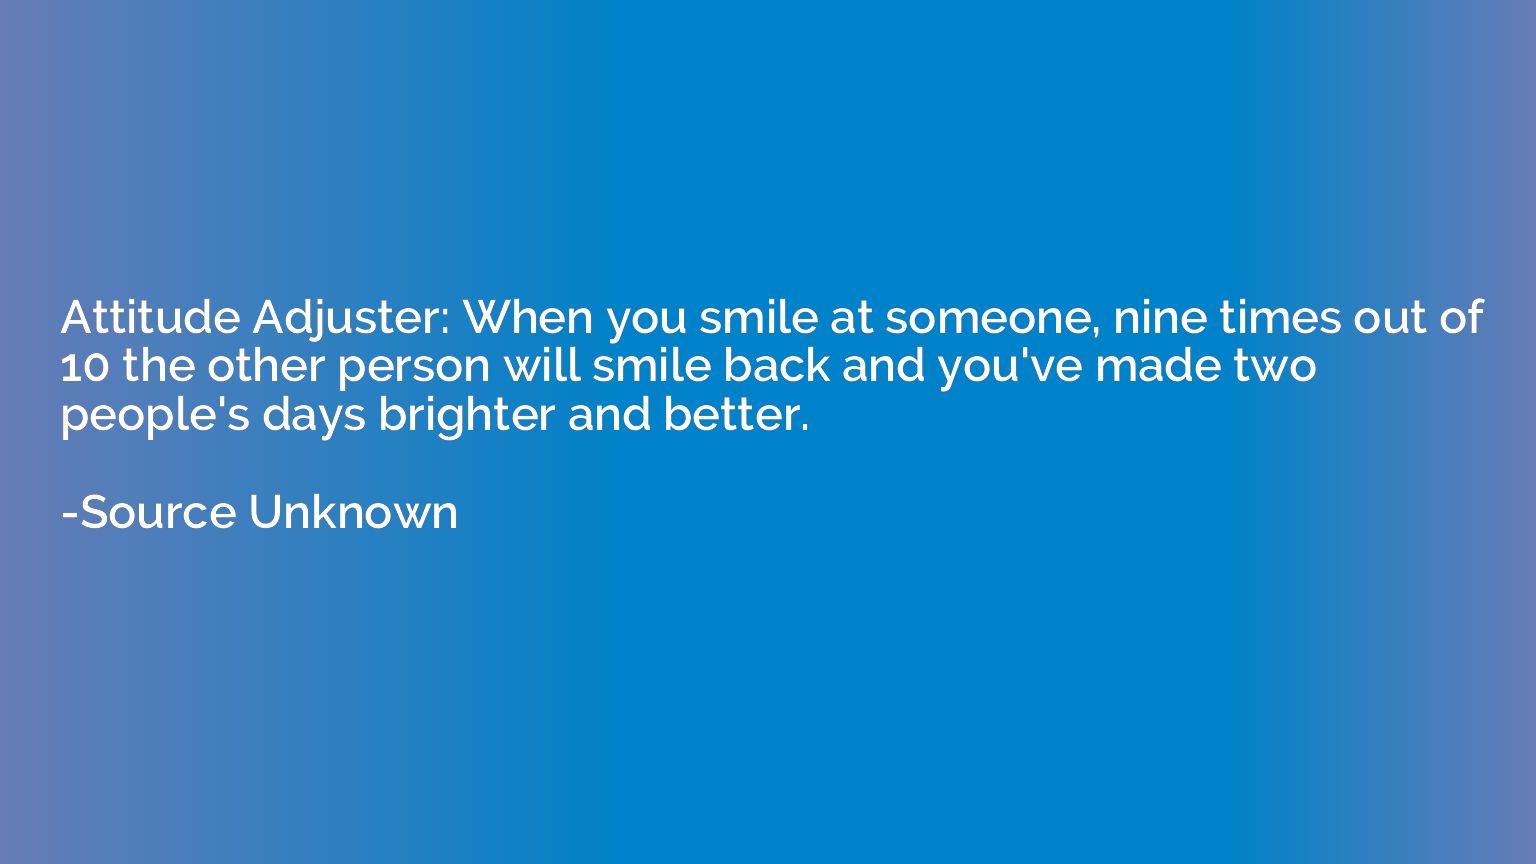 Attitude Adjuster: When you smile at someone, nine times out